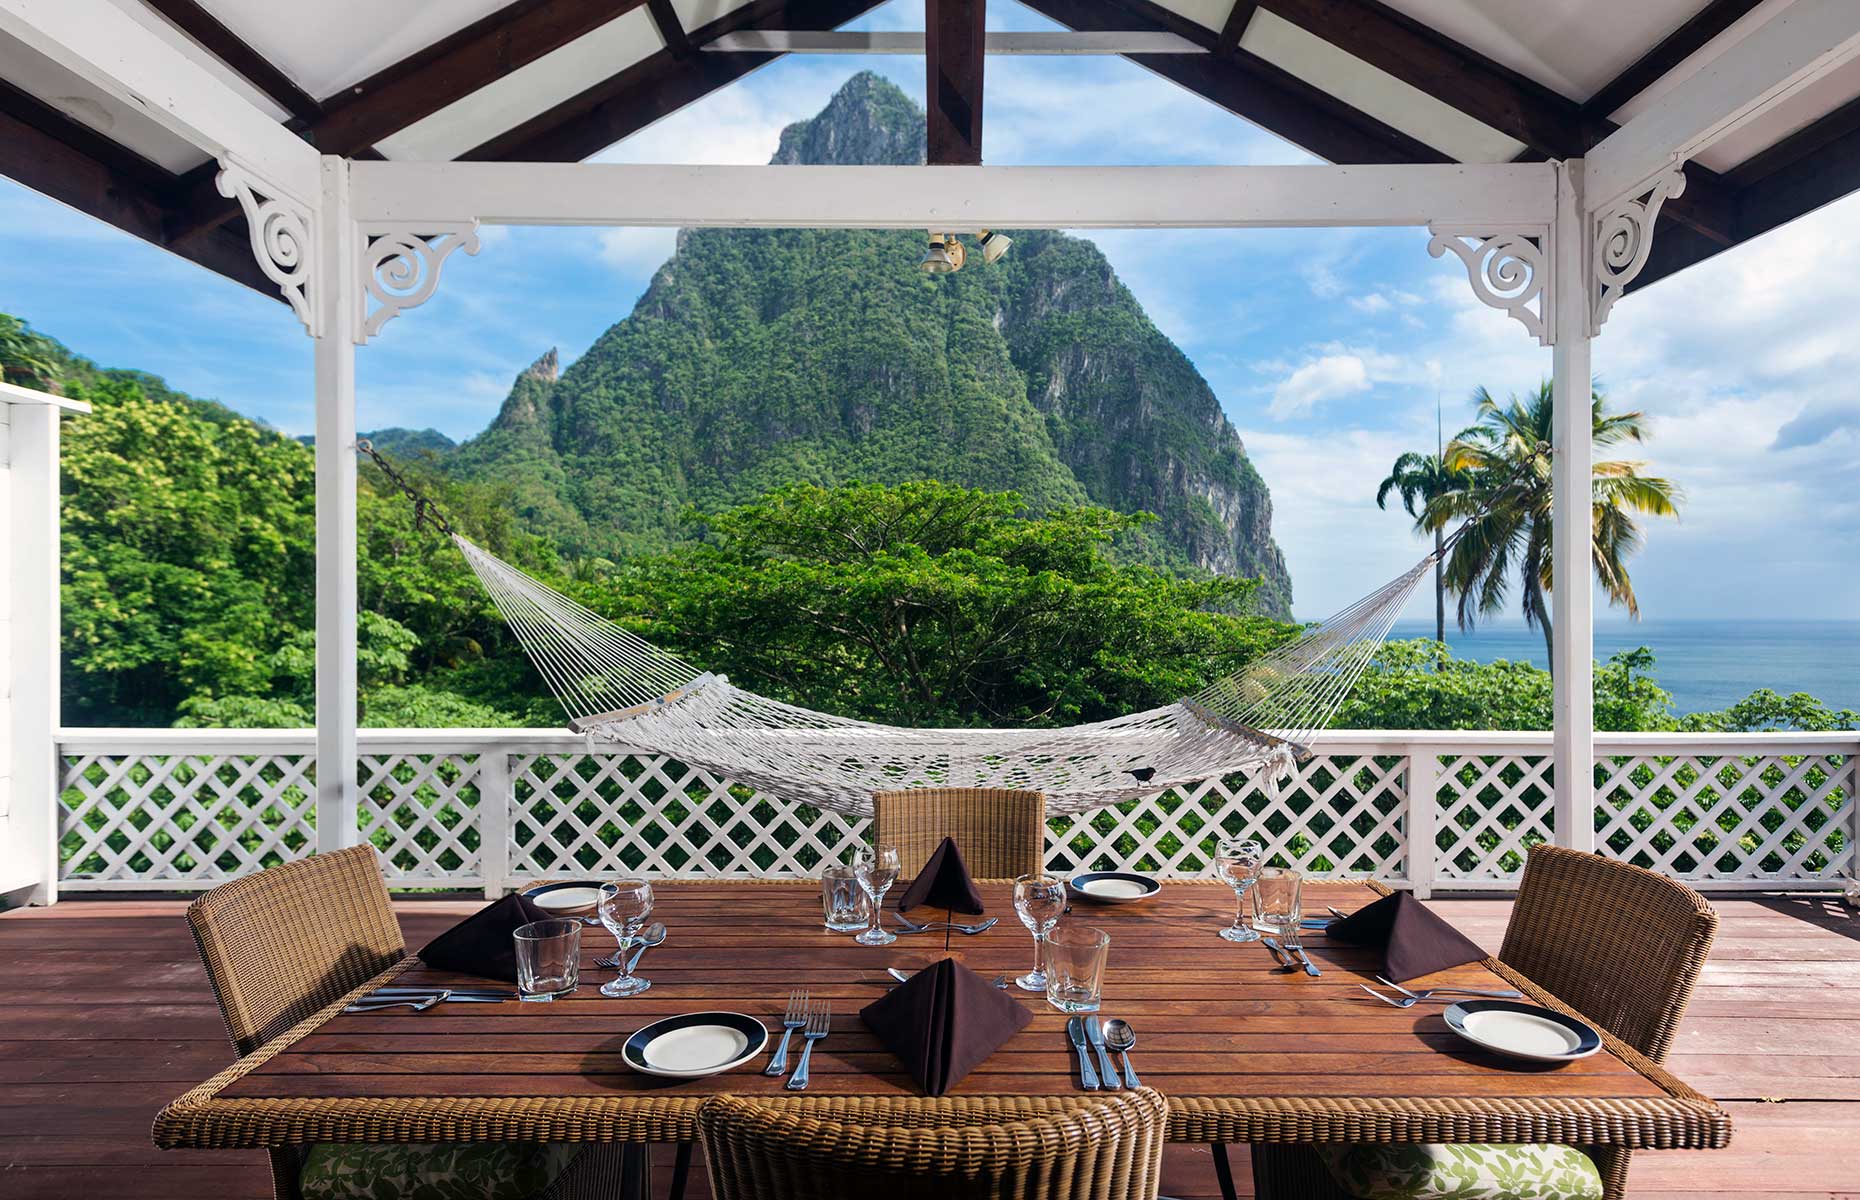 View of the triangular-shaped Ption Mountains, St Lucia from the window of a villa at Stonefield Villa Resort (Image: Courtesy of Stonefield Villa Resort)